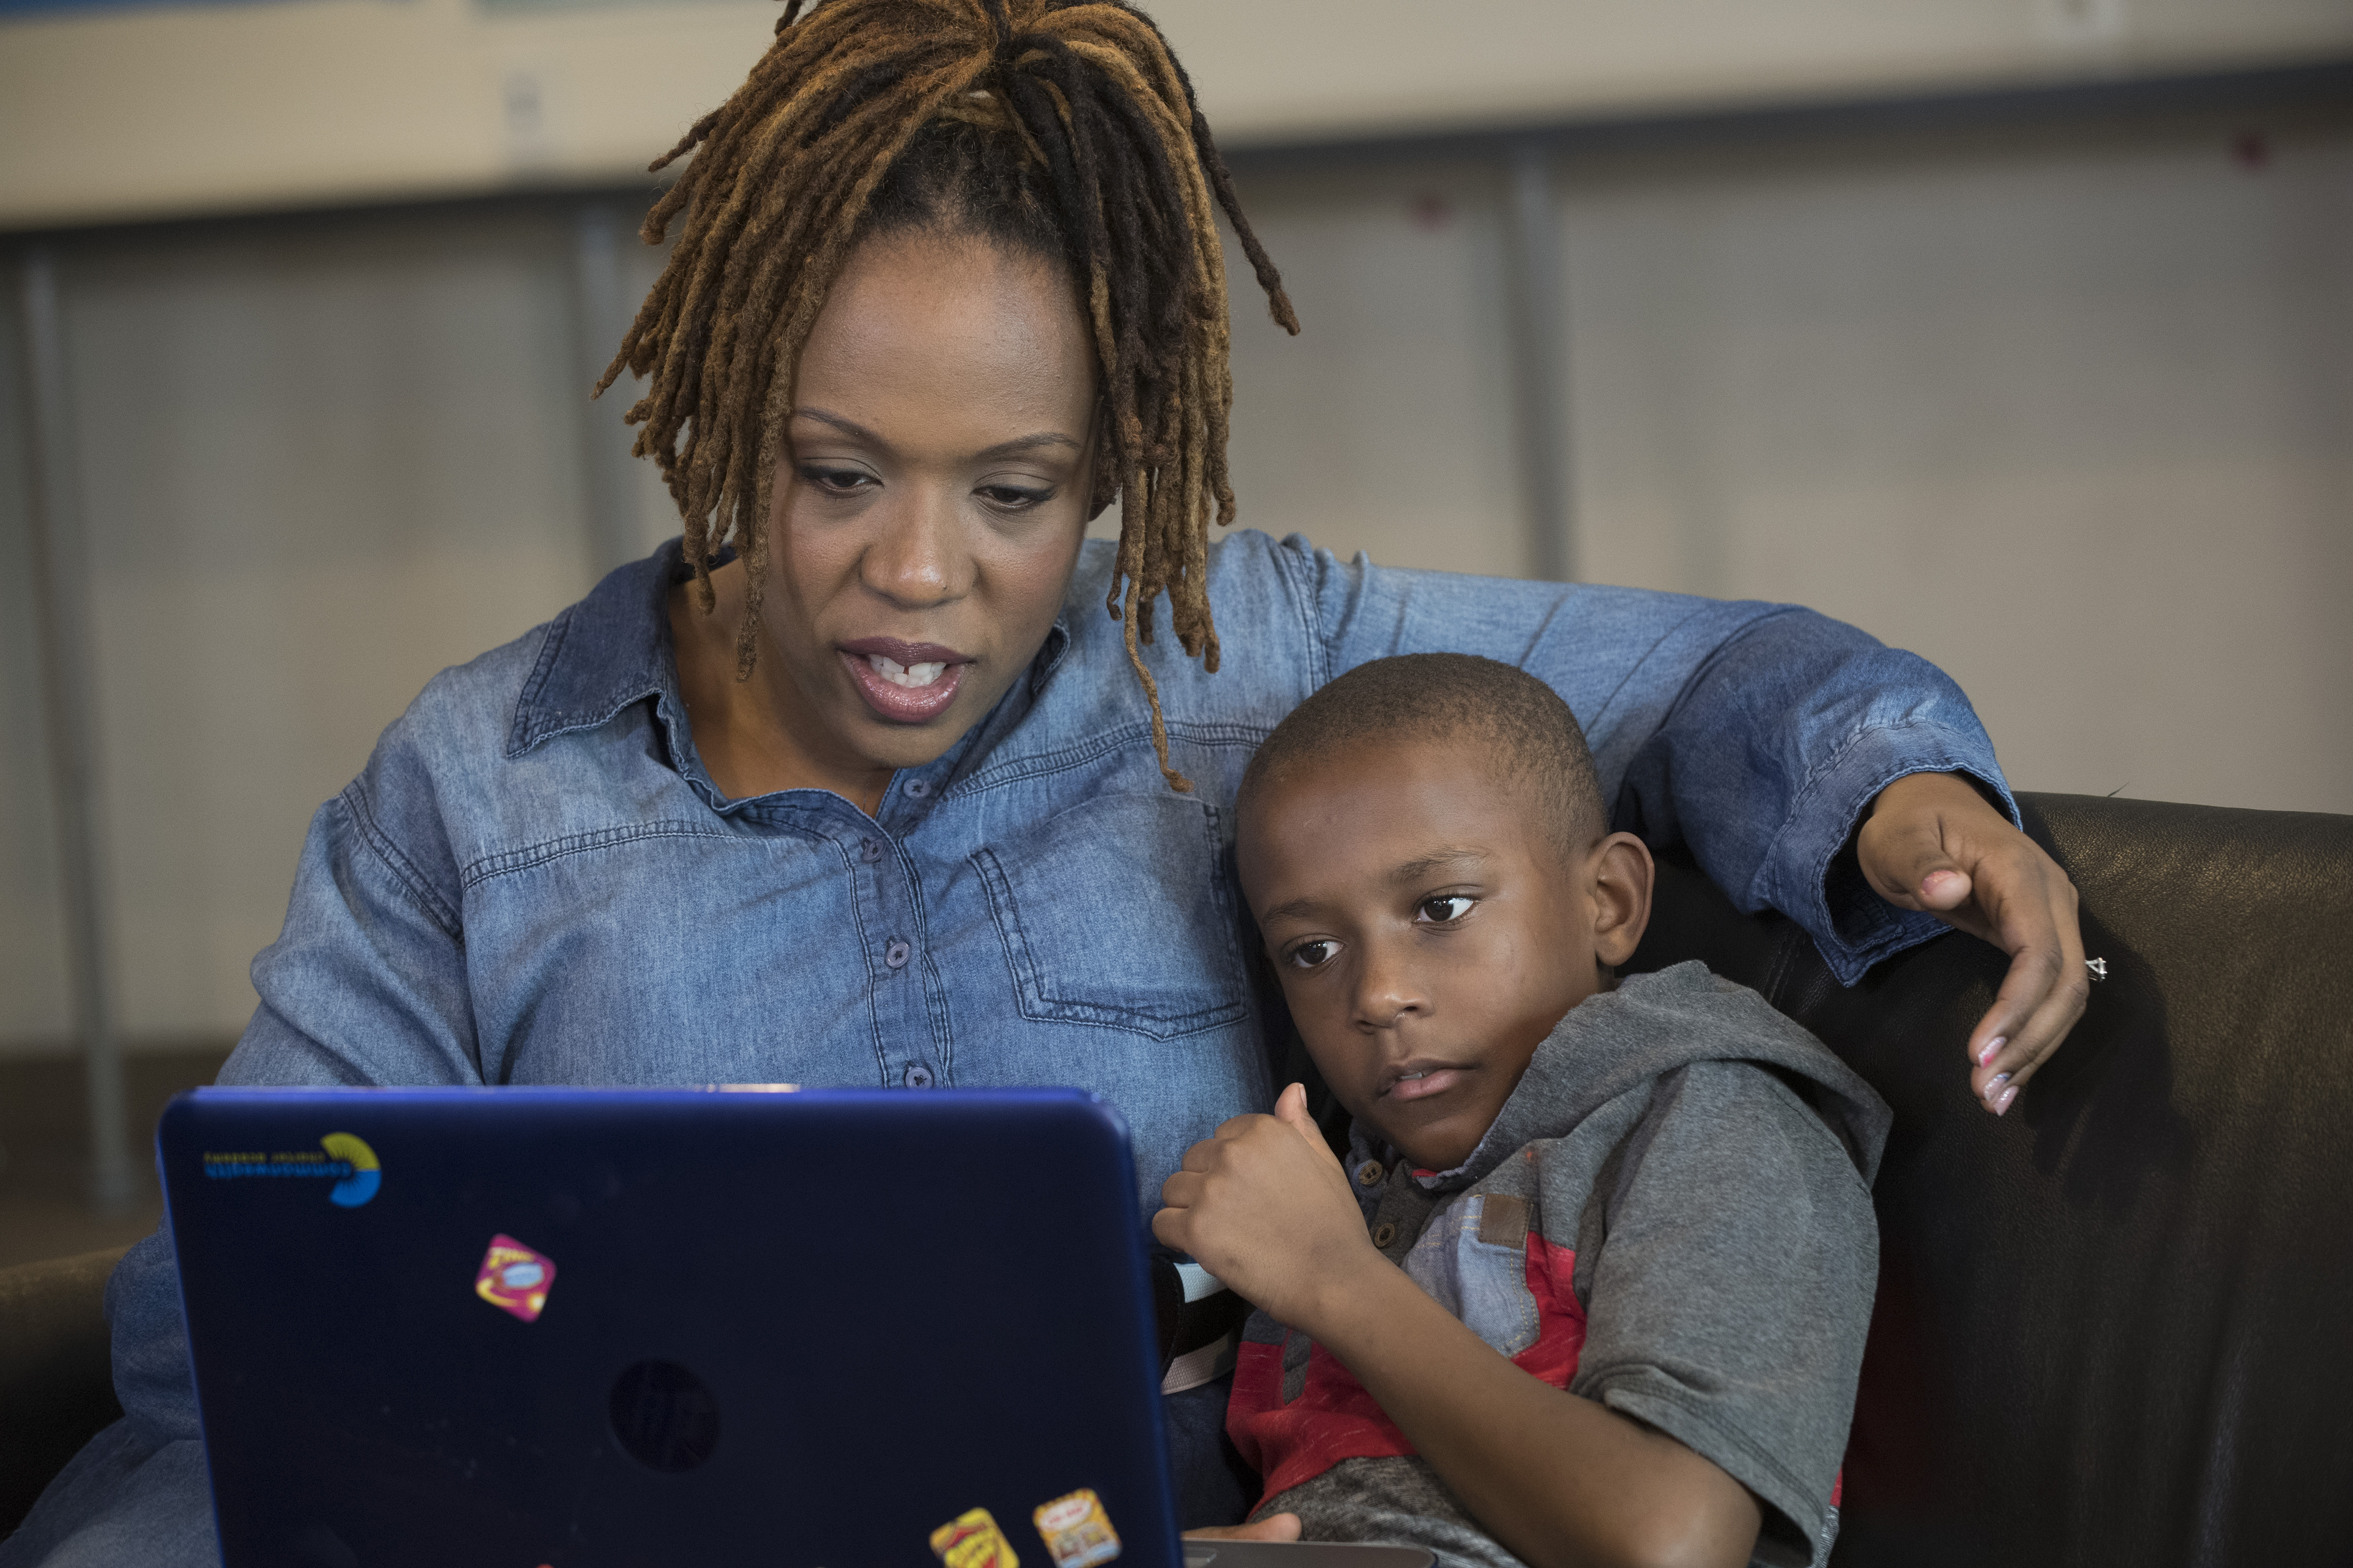 Mother and child using a laptop